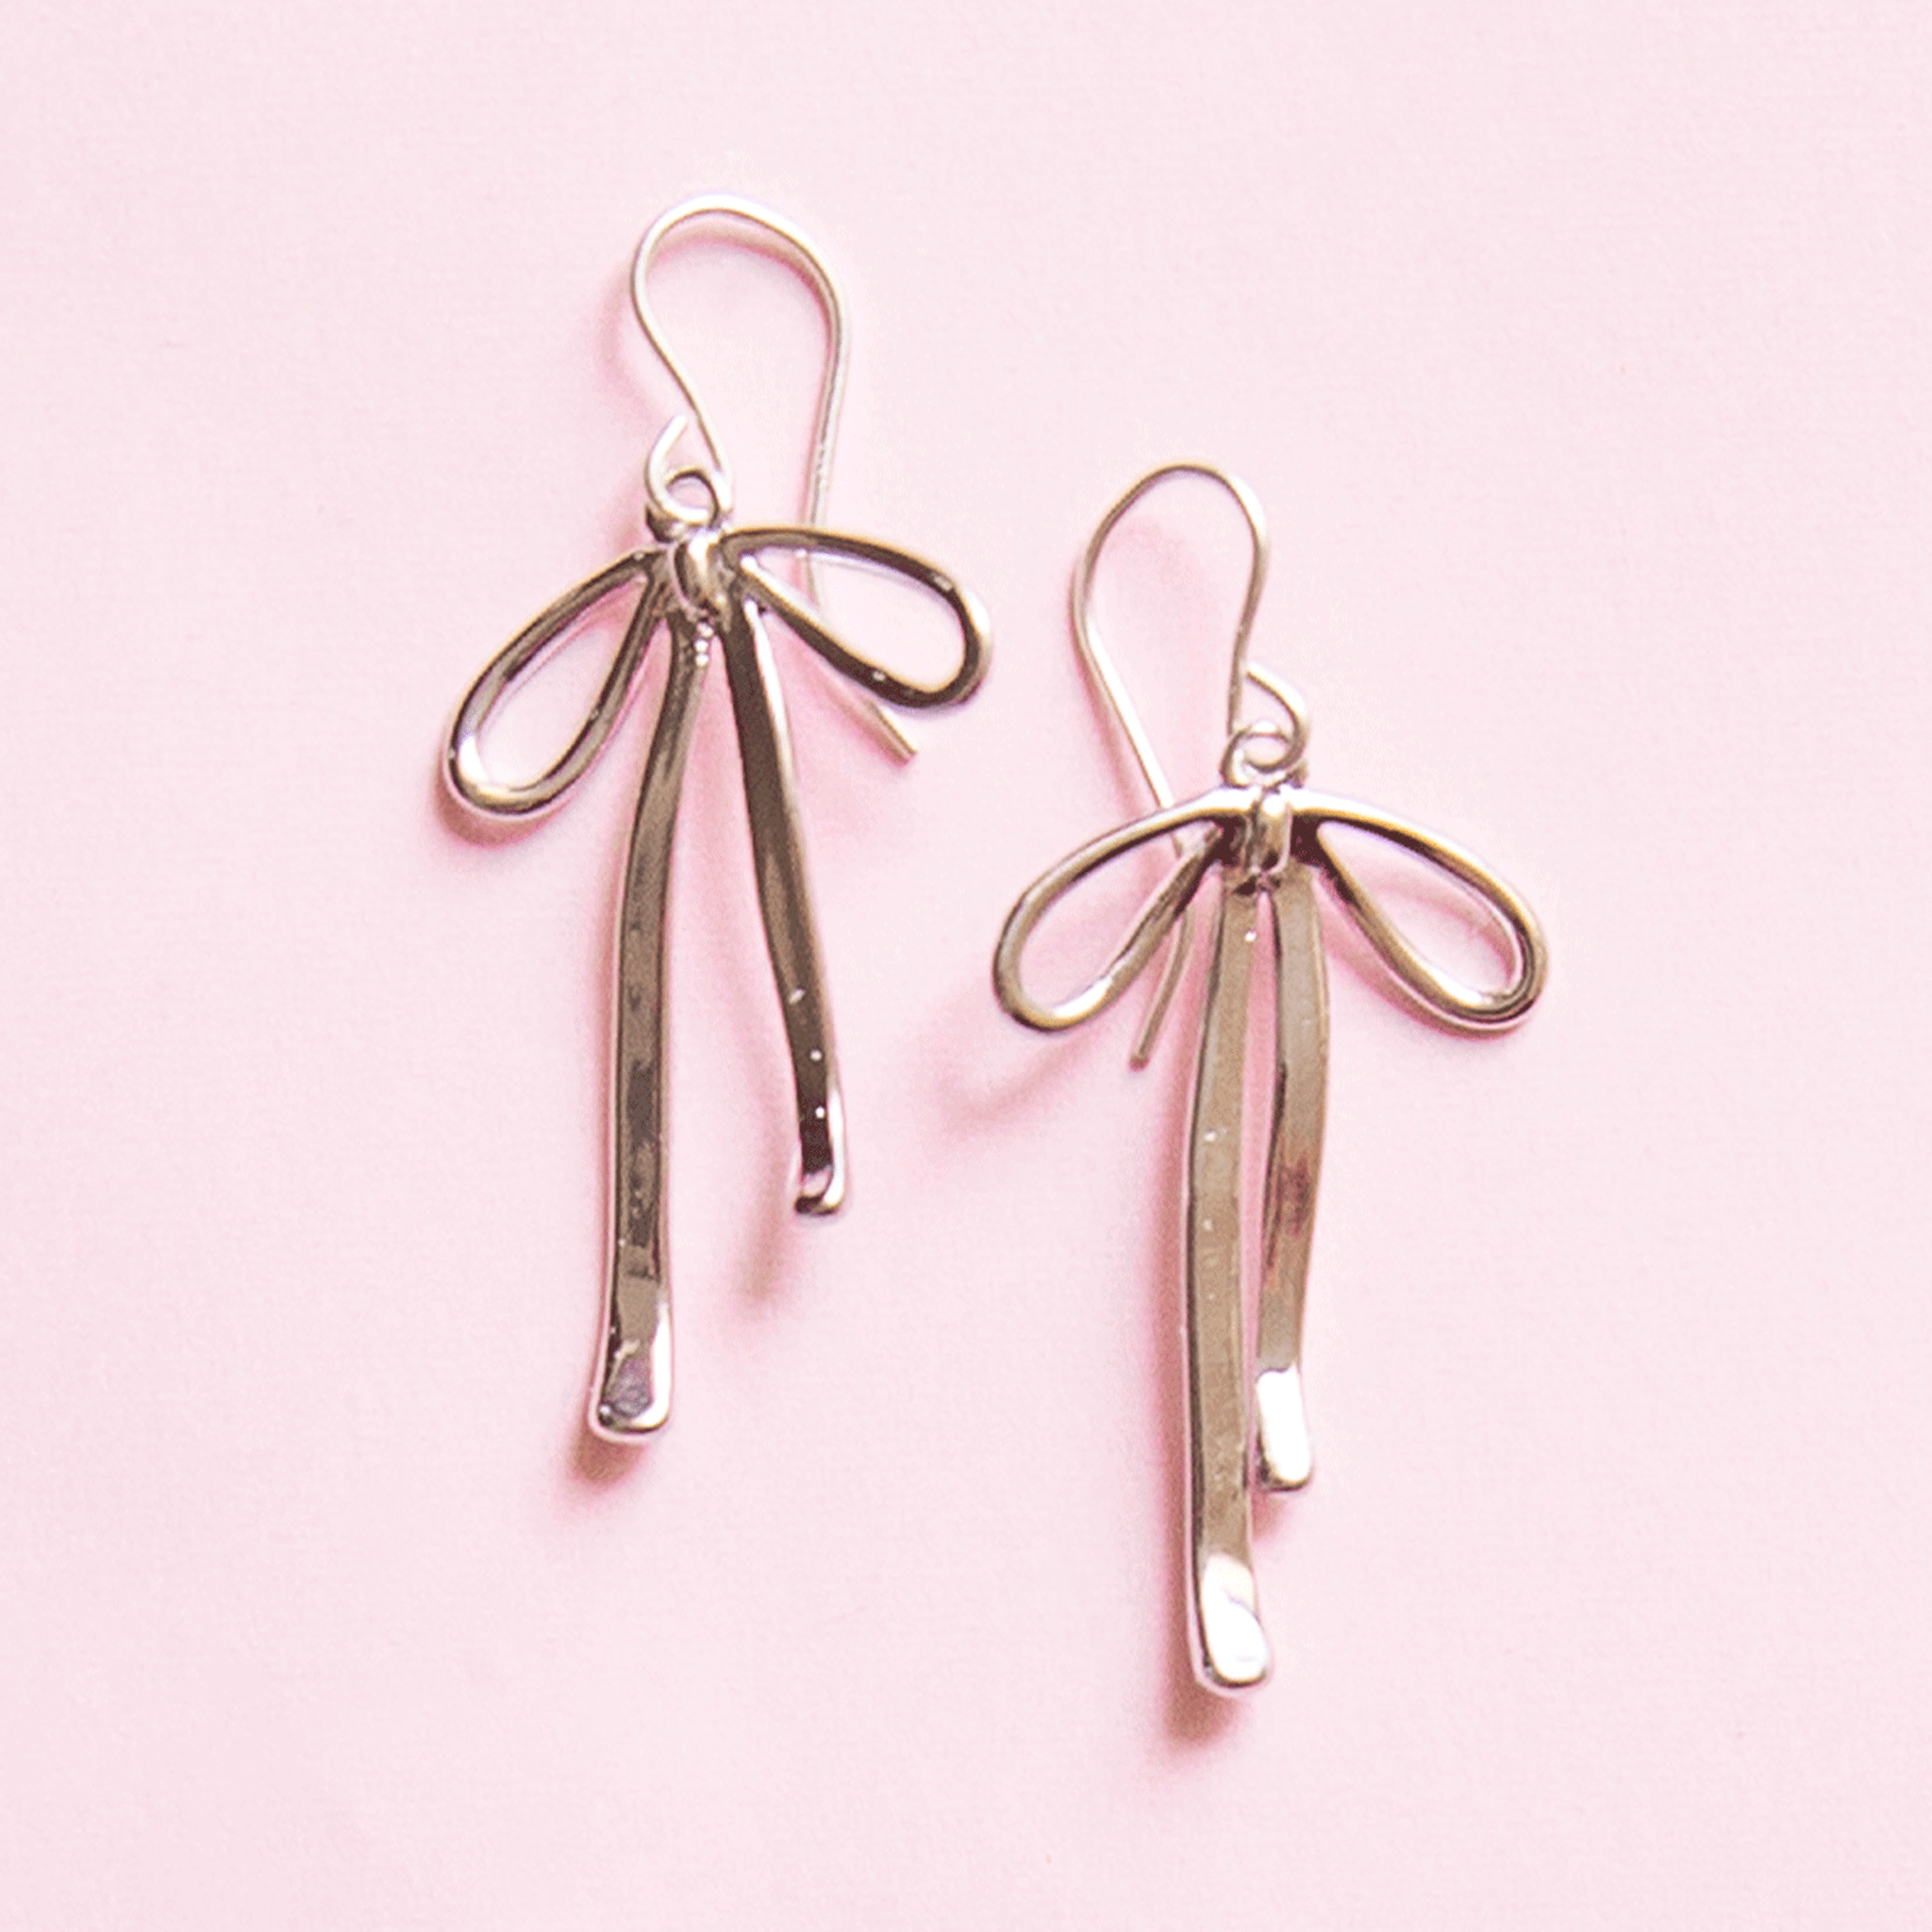 On a pink background is a pair of silver bow shaped earrings.